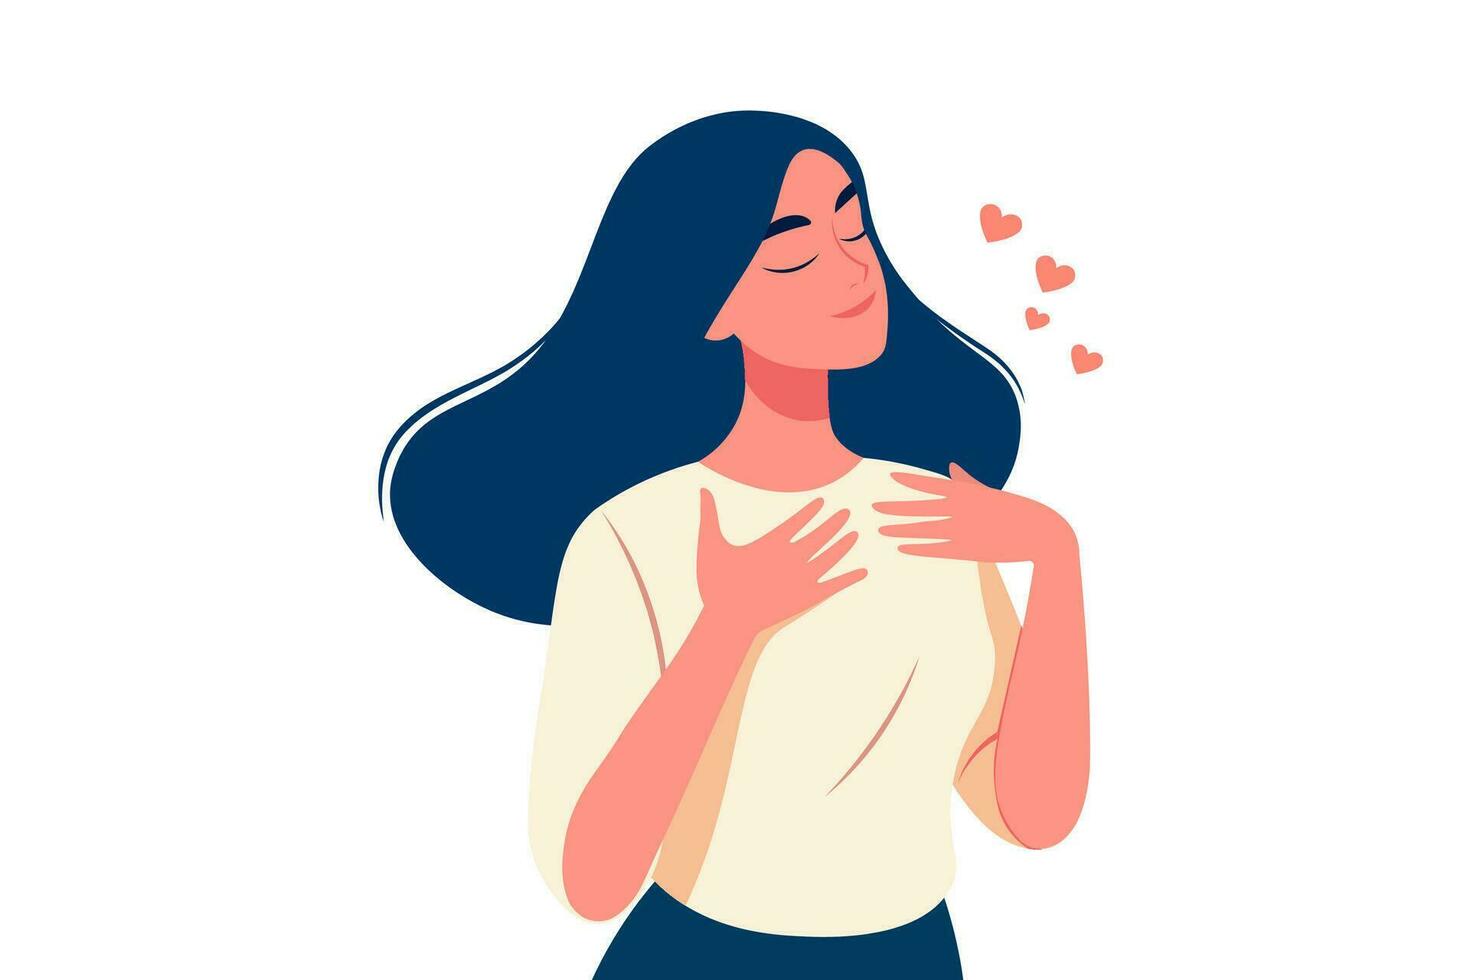 happy and positive woman with long hair, hugging oneself ,Love yourself, self-love and self-care concept. vector illustration.